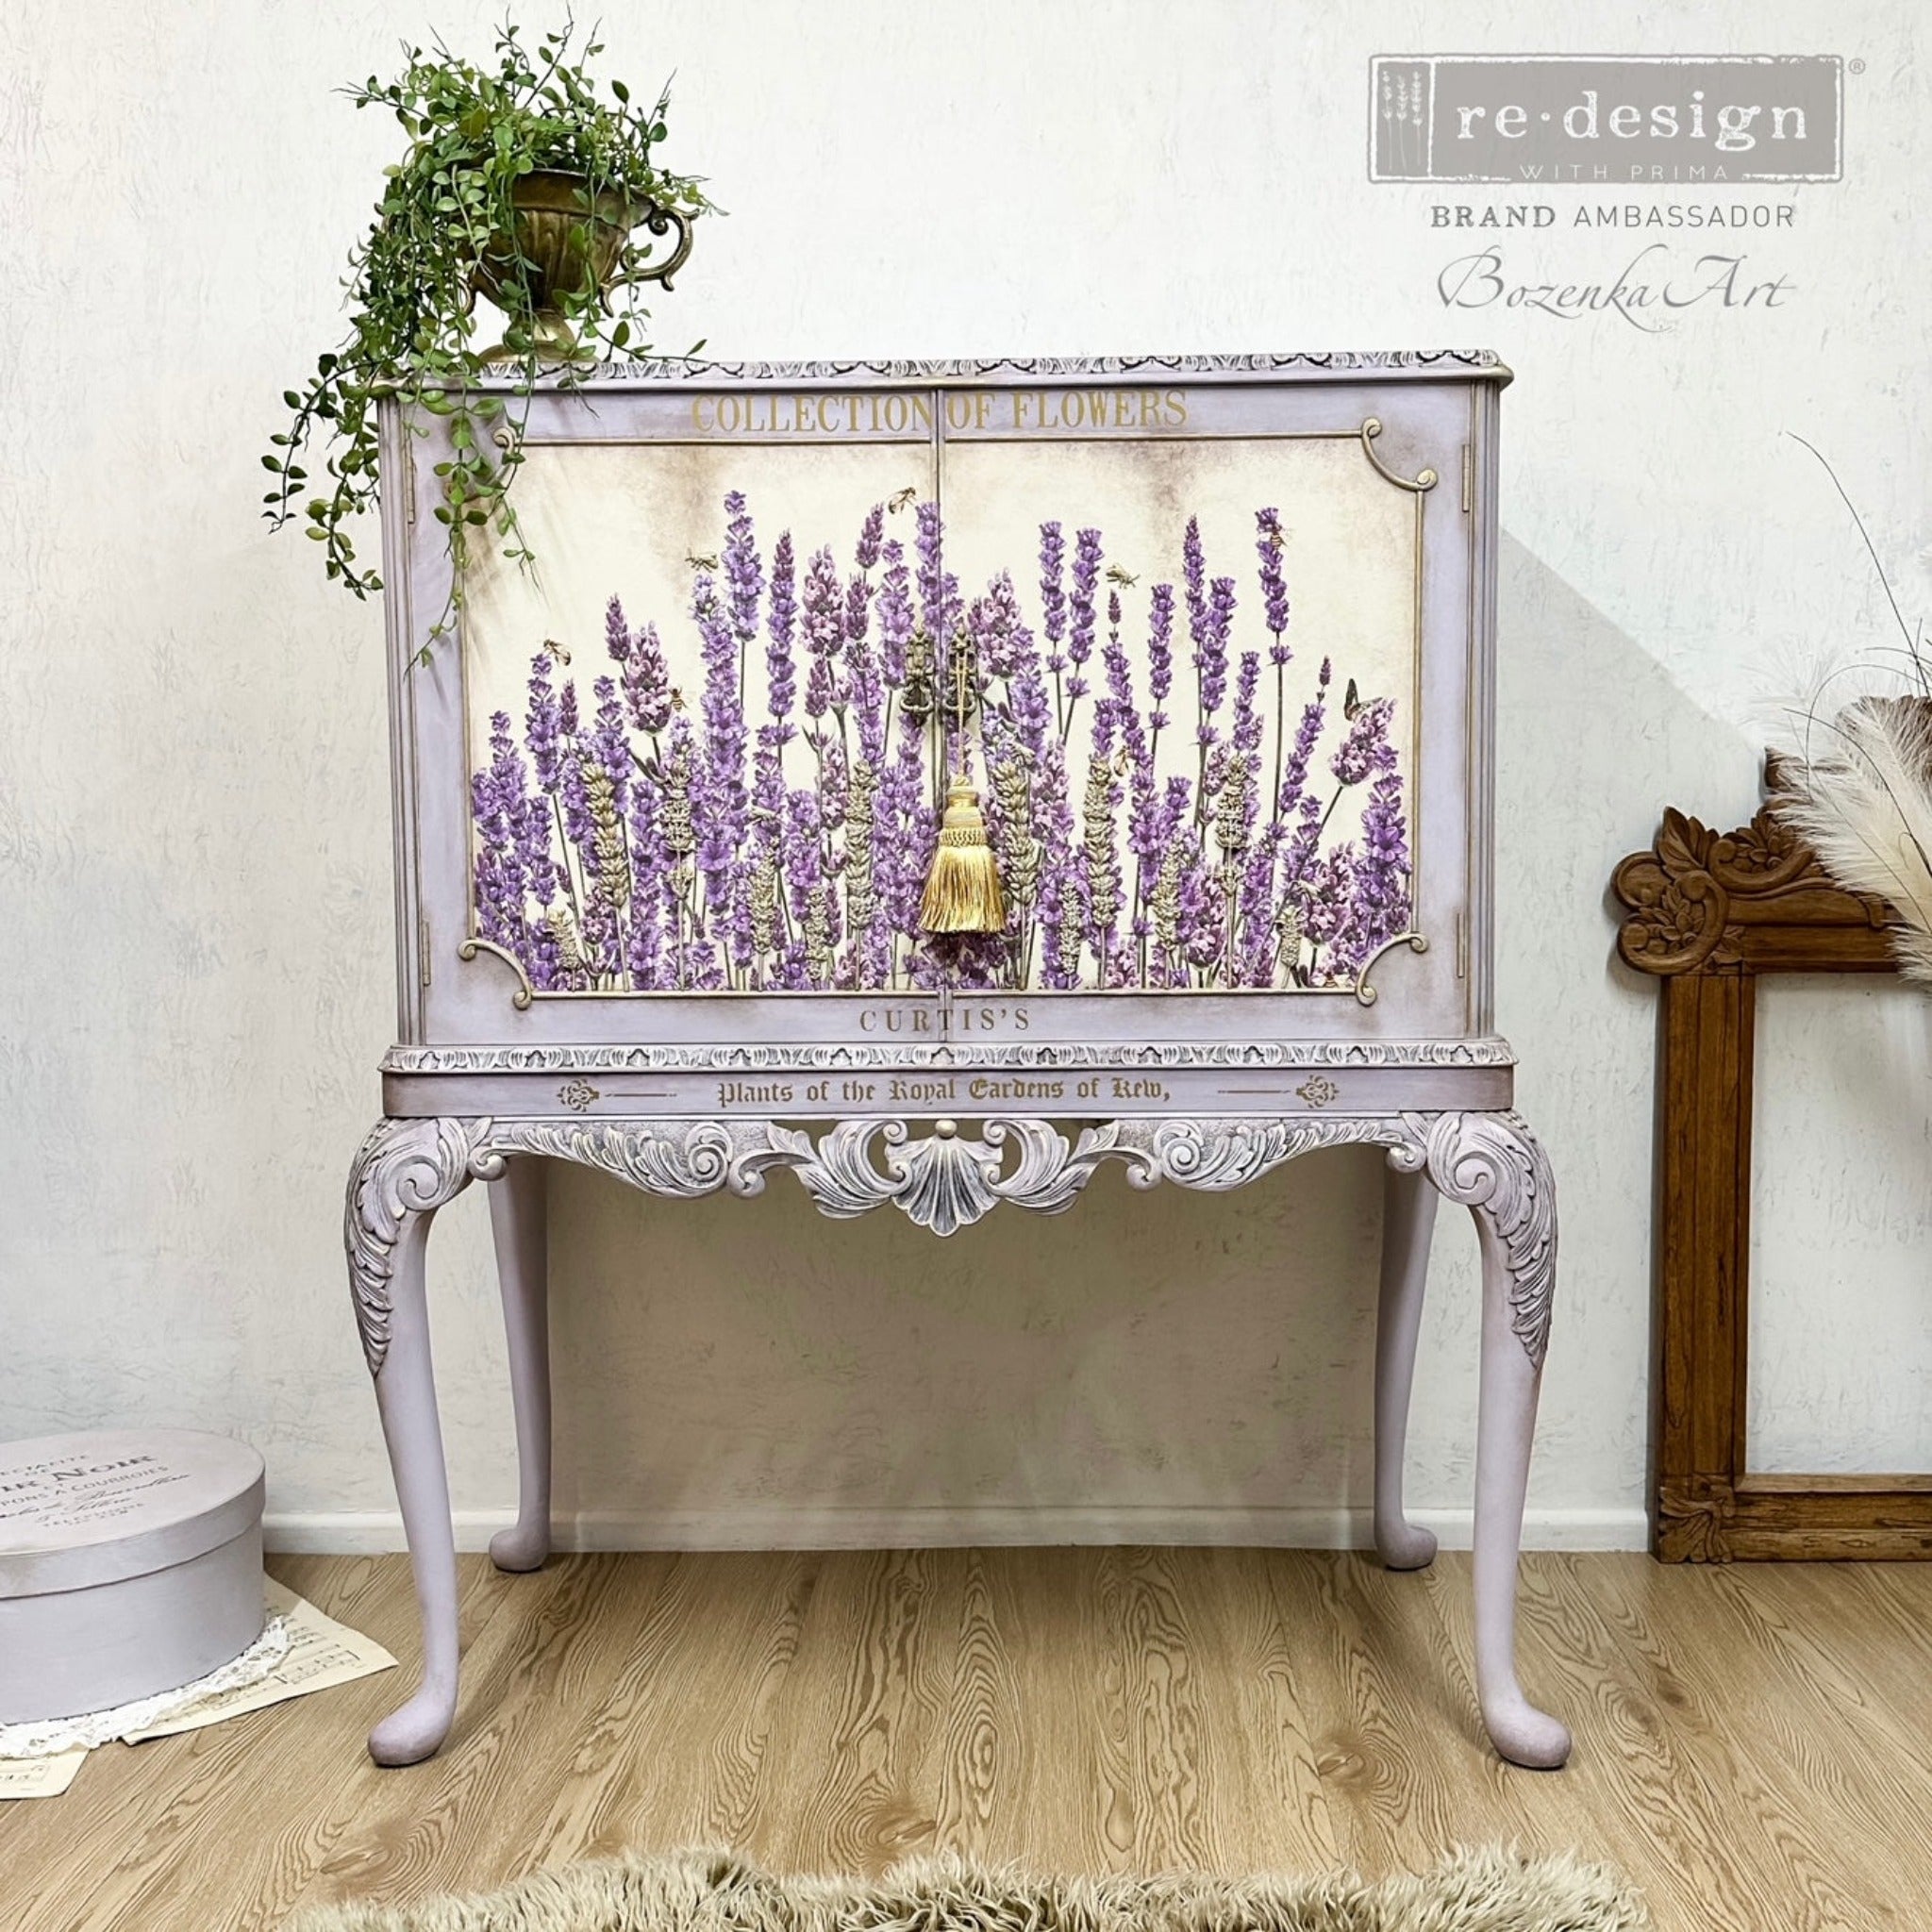 A vintage end table with storage refurbished by Bozenka Art is painted purple-grey and features ReDesign with Prima's Champs de Lavende transfer on its 2 door inlays.